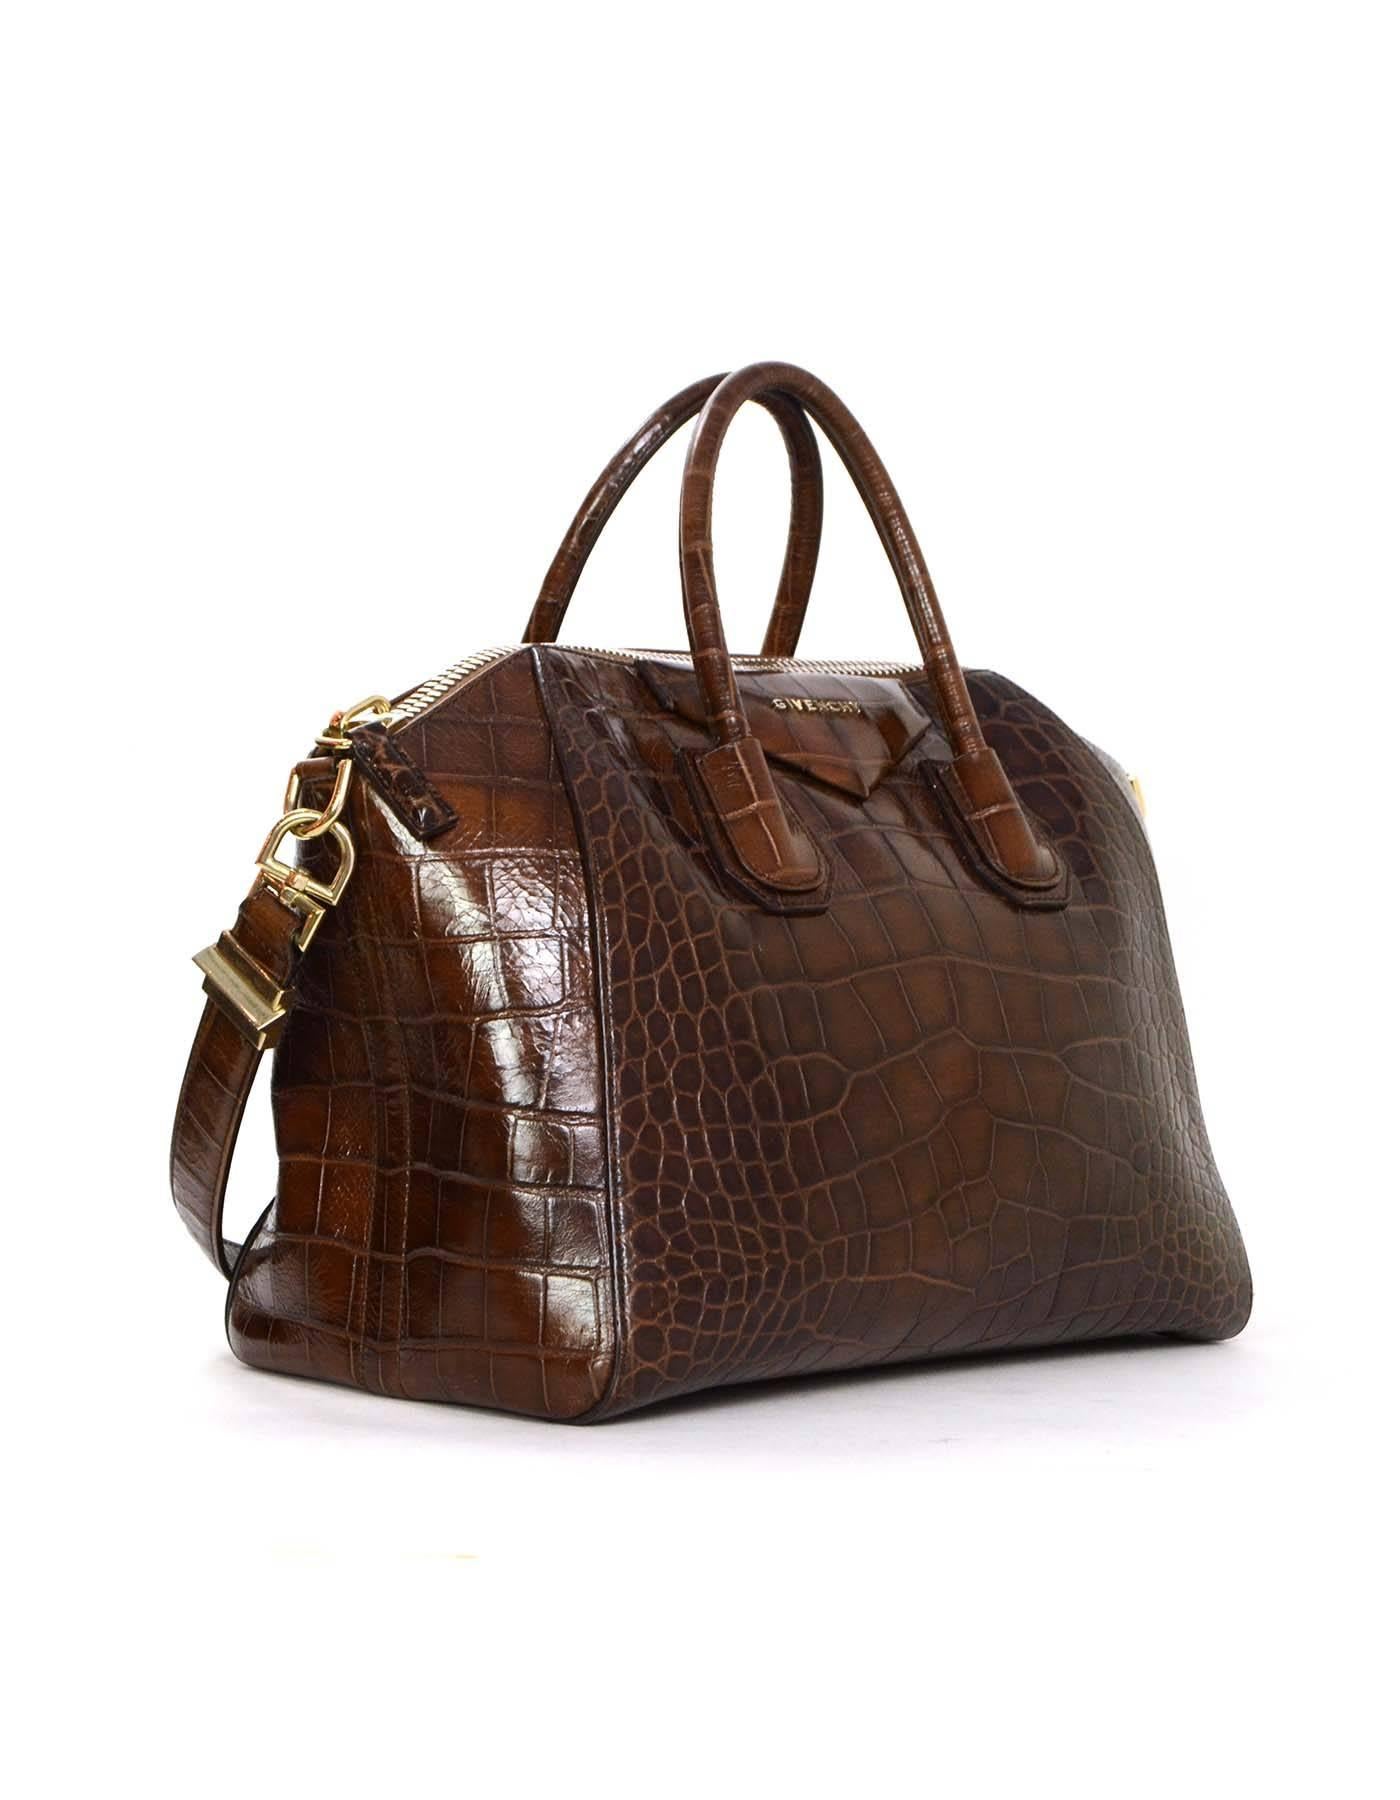 Givenchy Brown Croc Embossed Medium Antigona Bag
Features optional shoulder strap
Made In: Italy
Year of Production: 2012
Color: Brown
Hardware: Goldtone
Materials: Croc embossed leather
Lining: Black canvas
Closure/Opening: Zip across